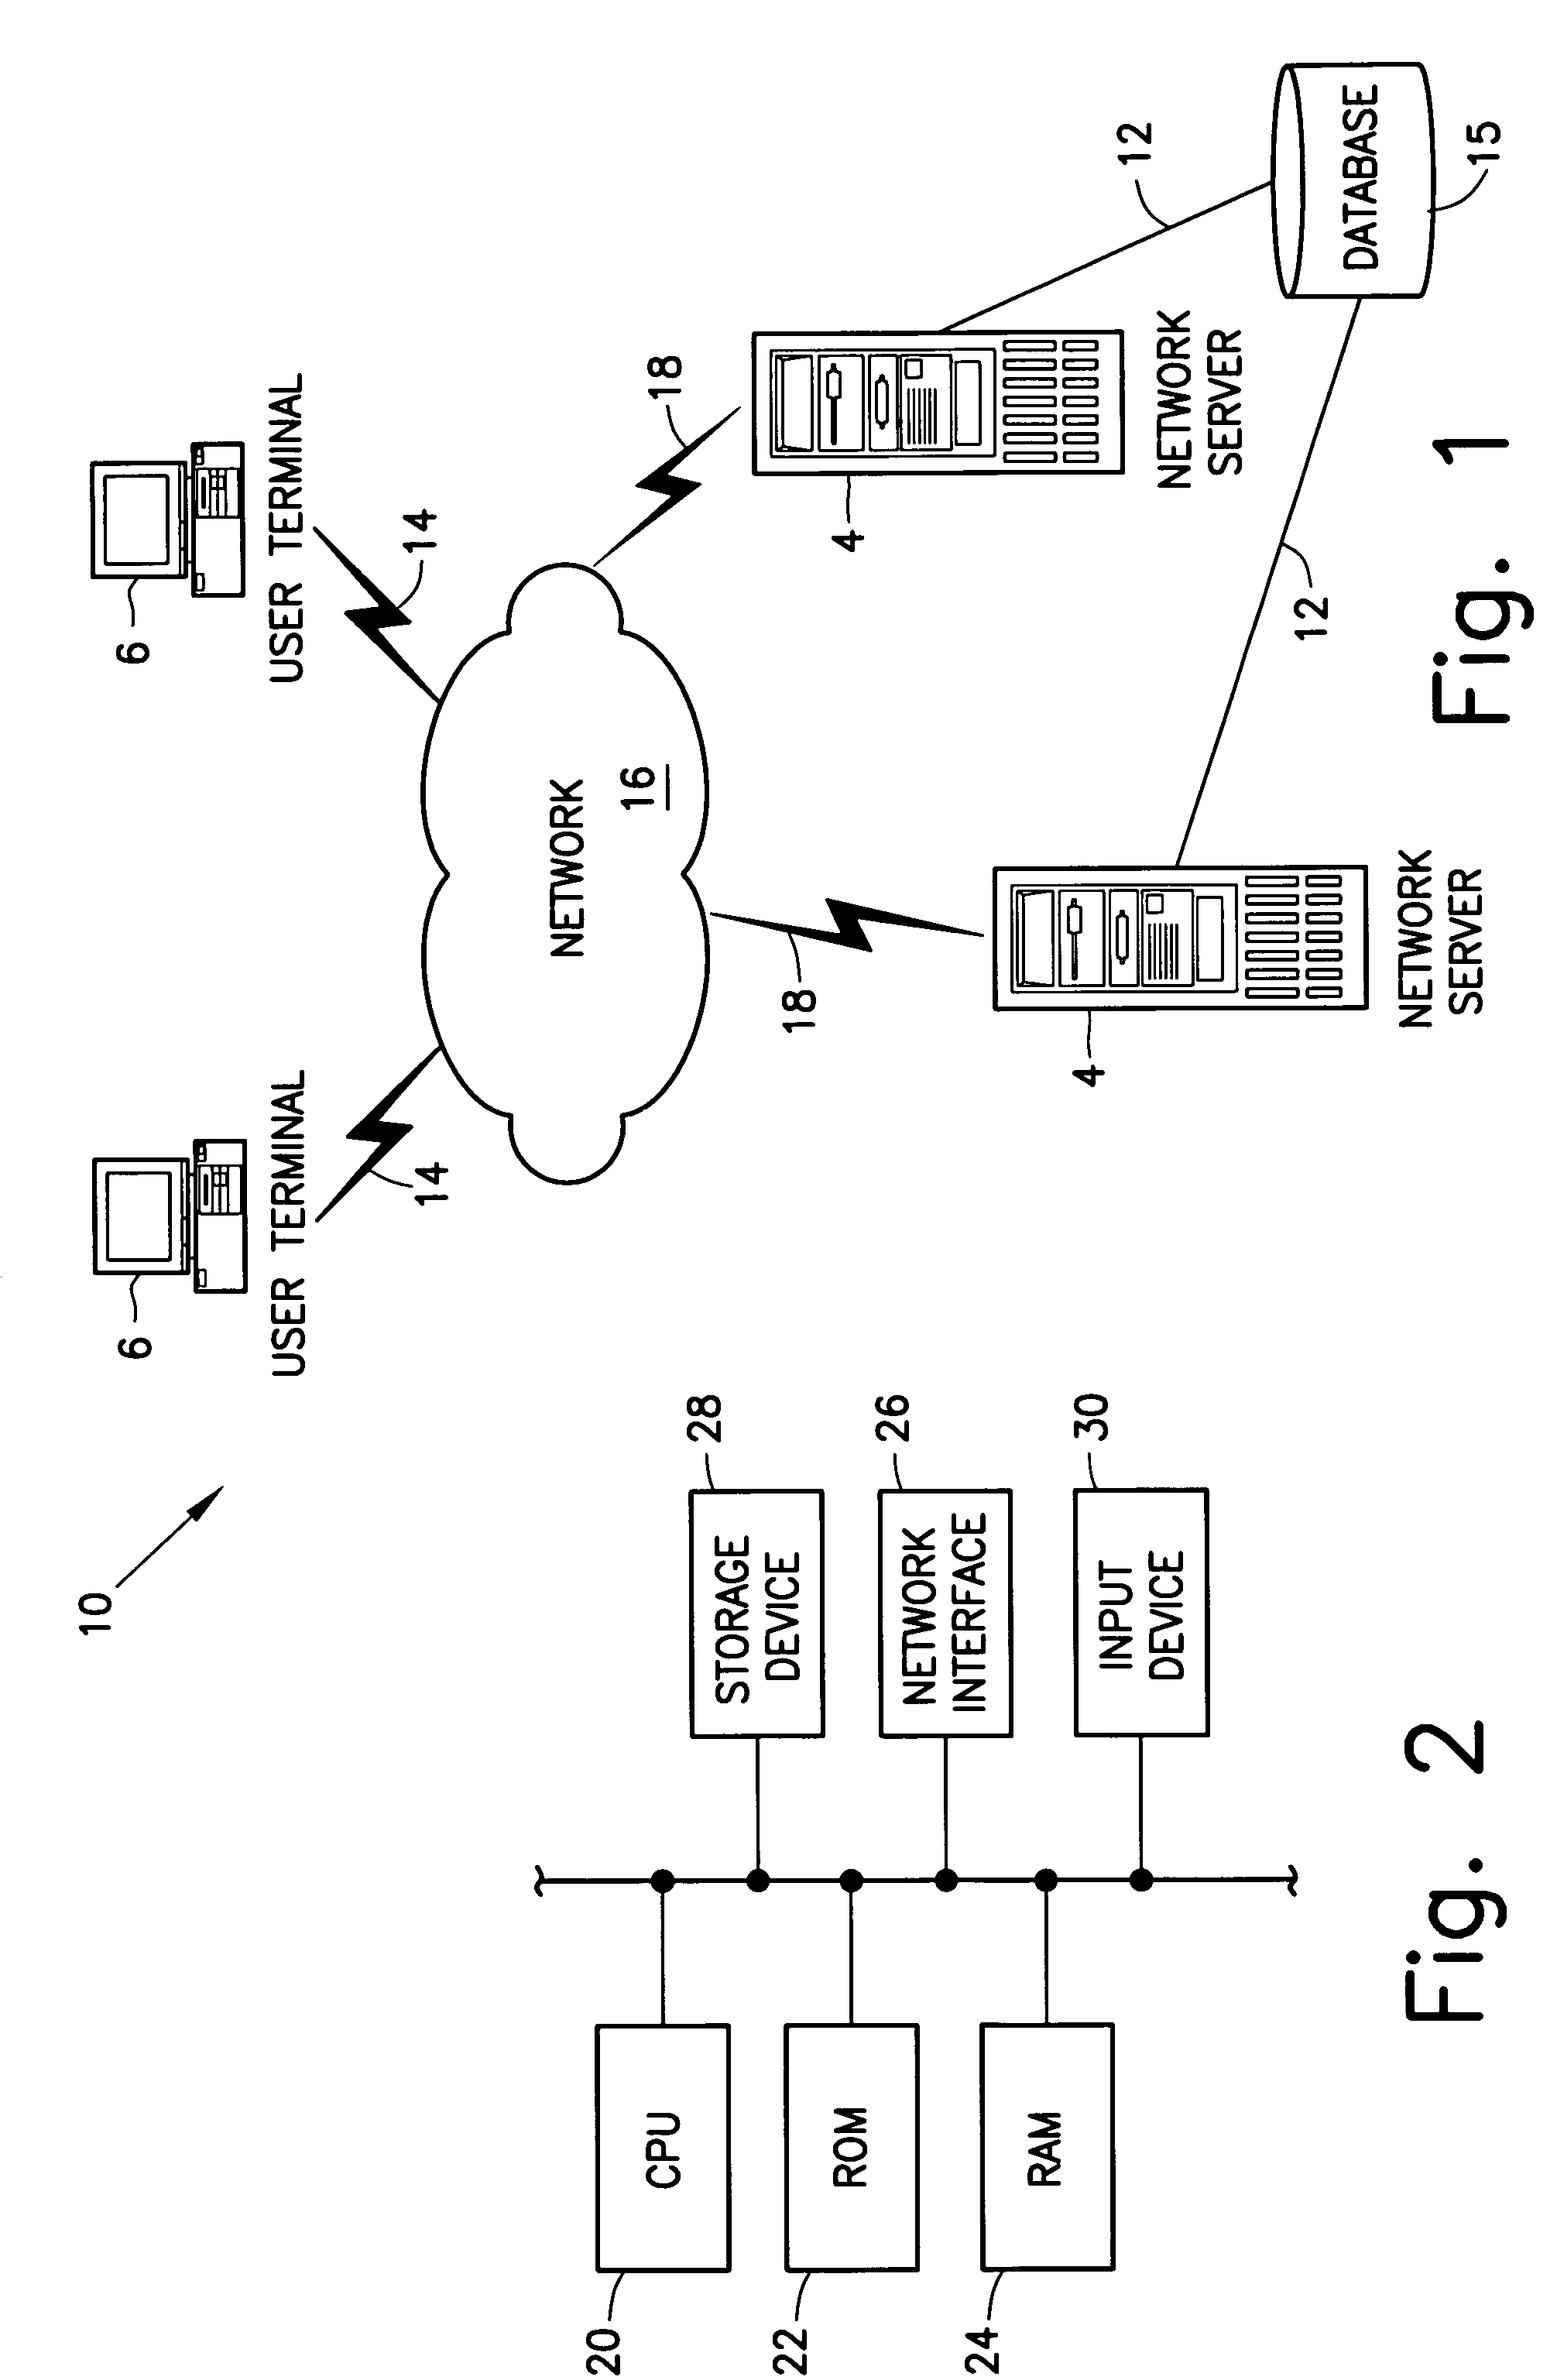 Method and apparatus for matching consumer of health care services to health care service provider